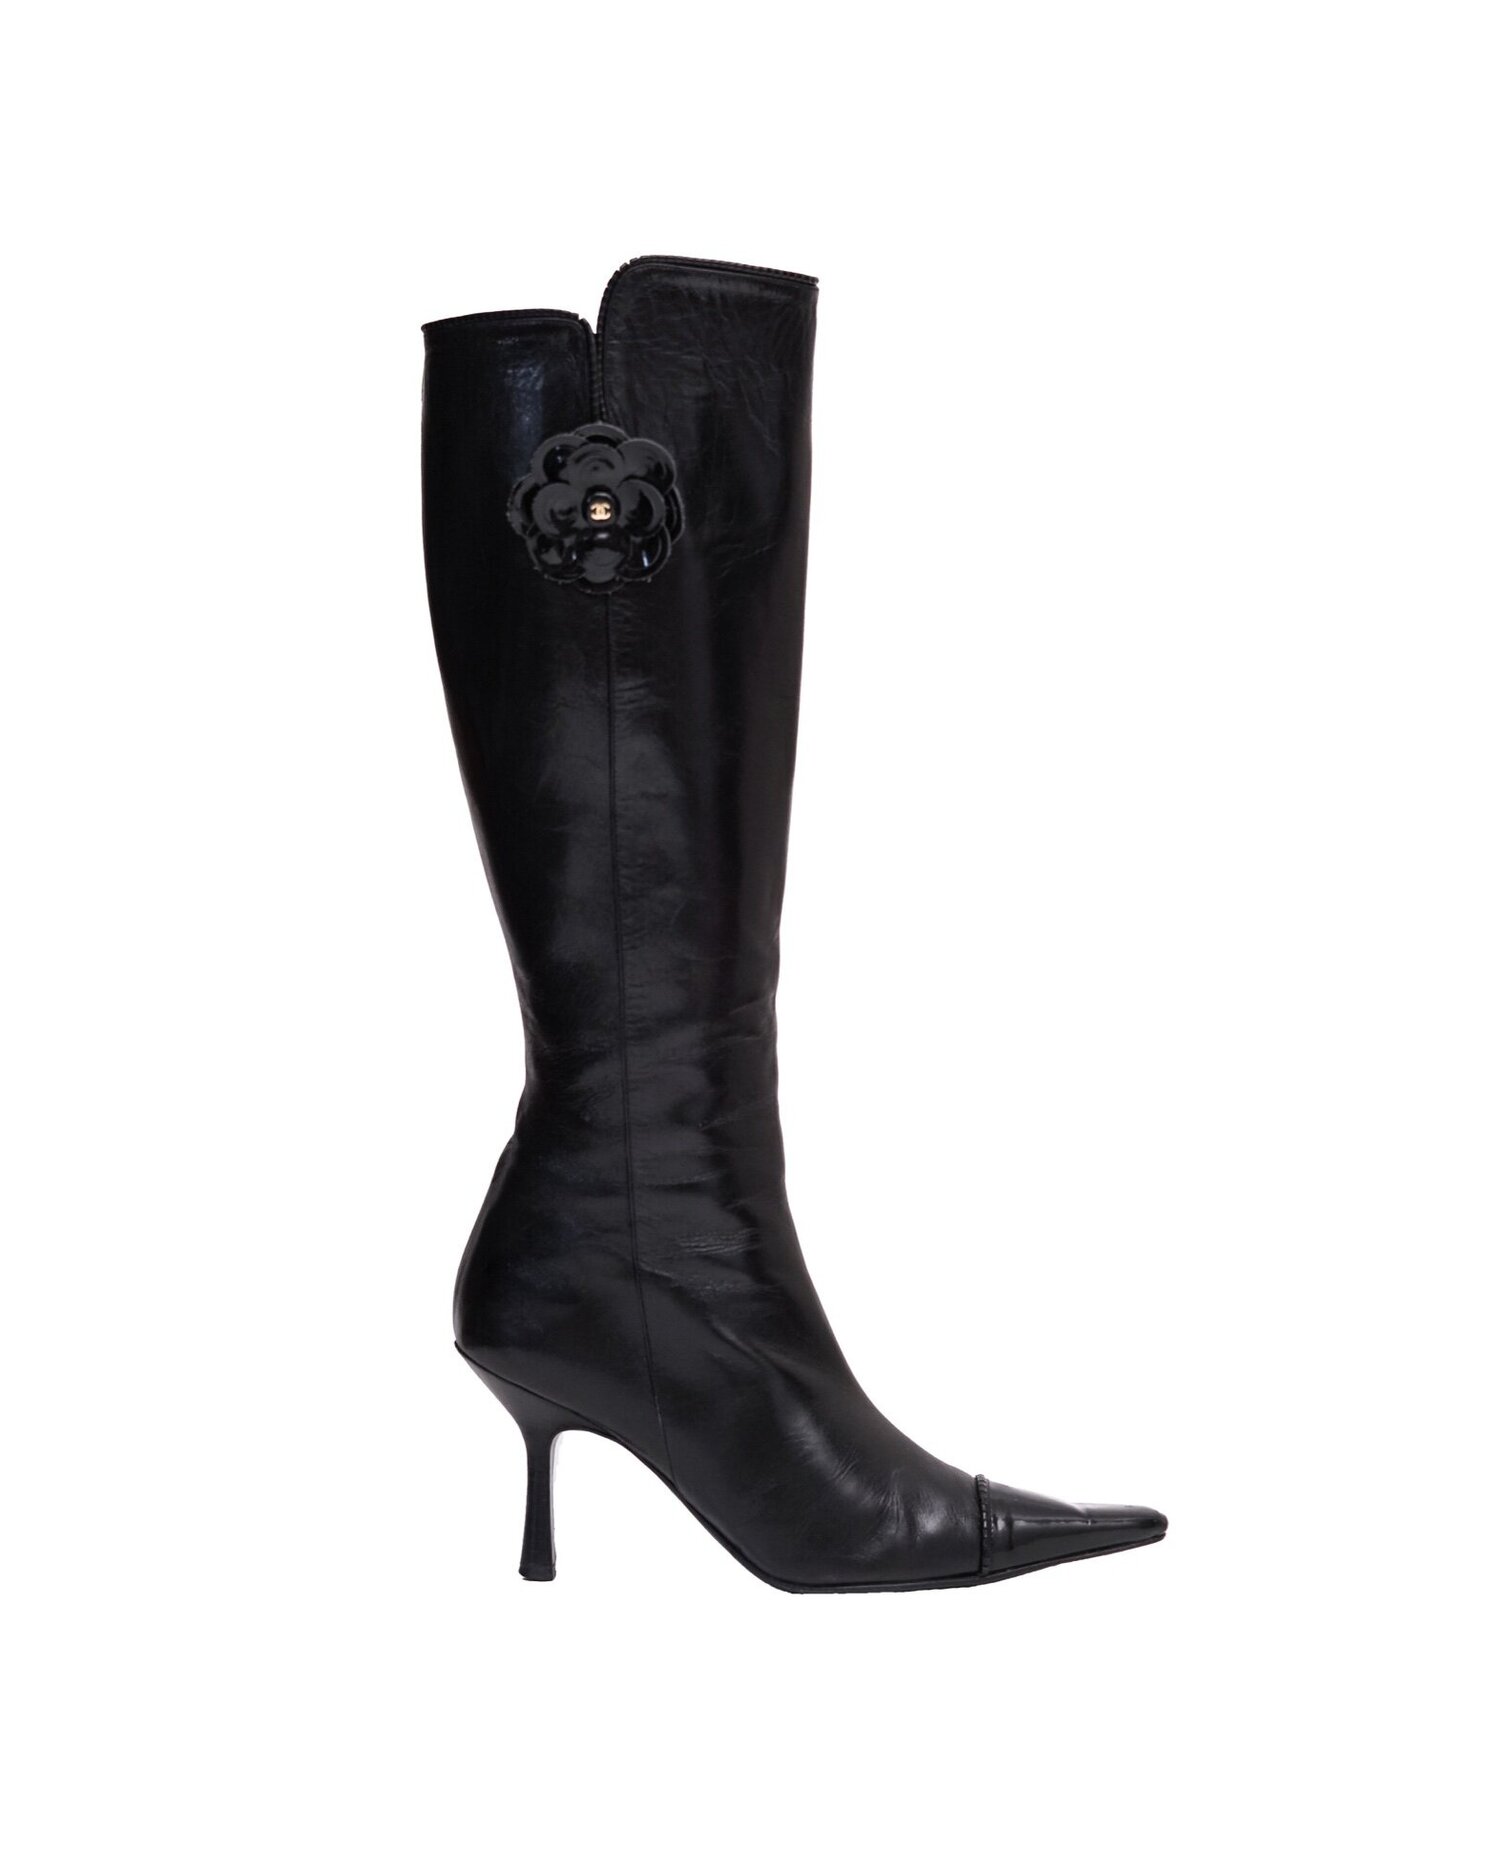 Chanel Women's CC Camellia Knee High Boots Stitched Calfskin